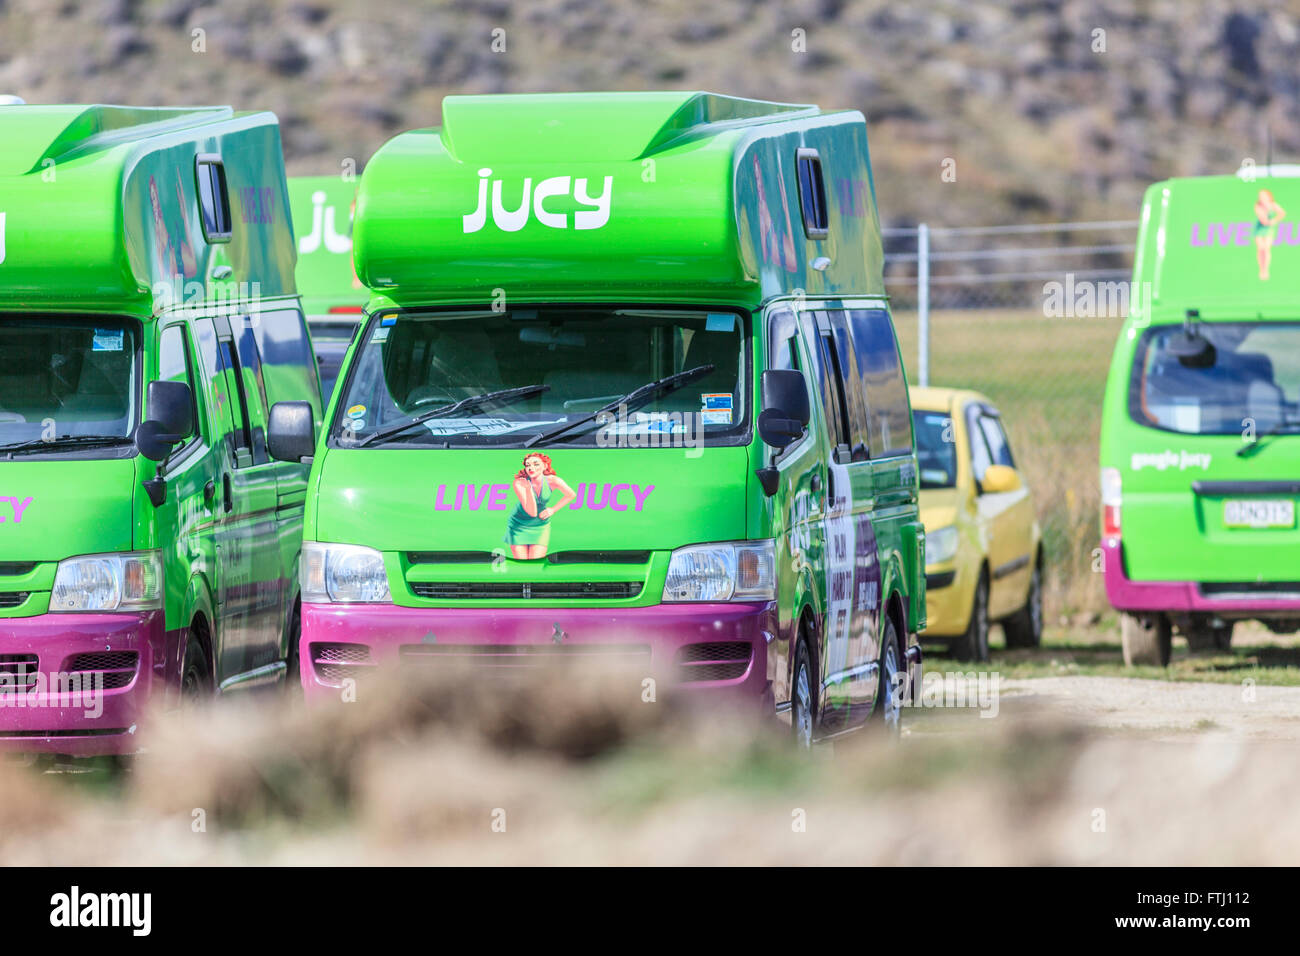 Jucy rental camper vans,at ZQN airport,Queenstown,Central Otago,South Island,New Zealand Stock Photo